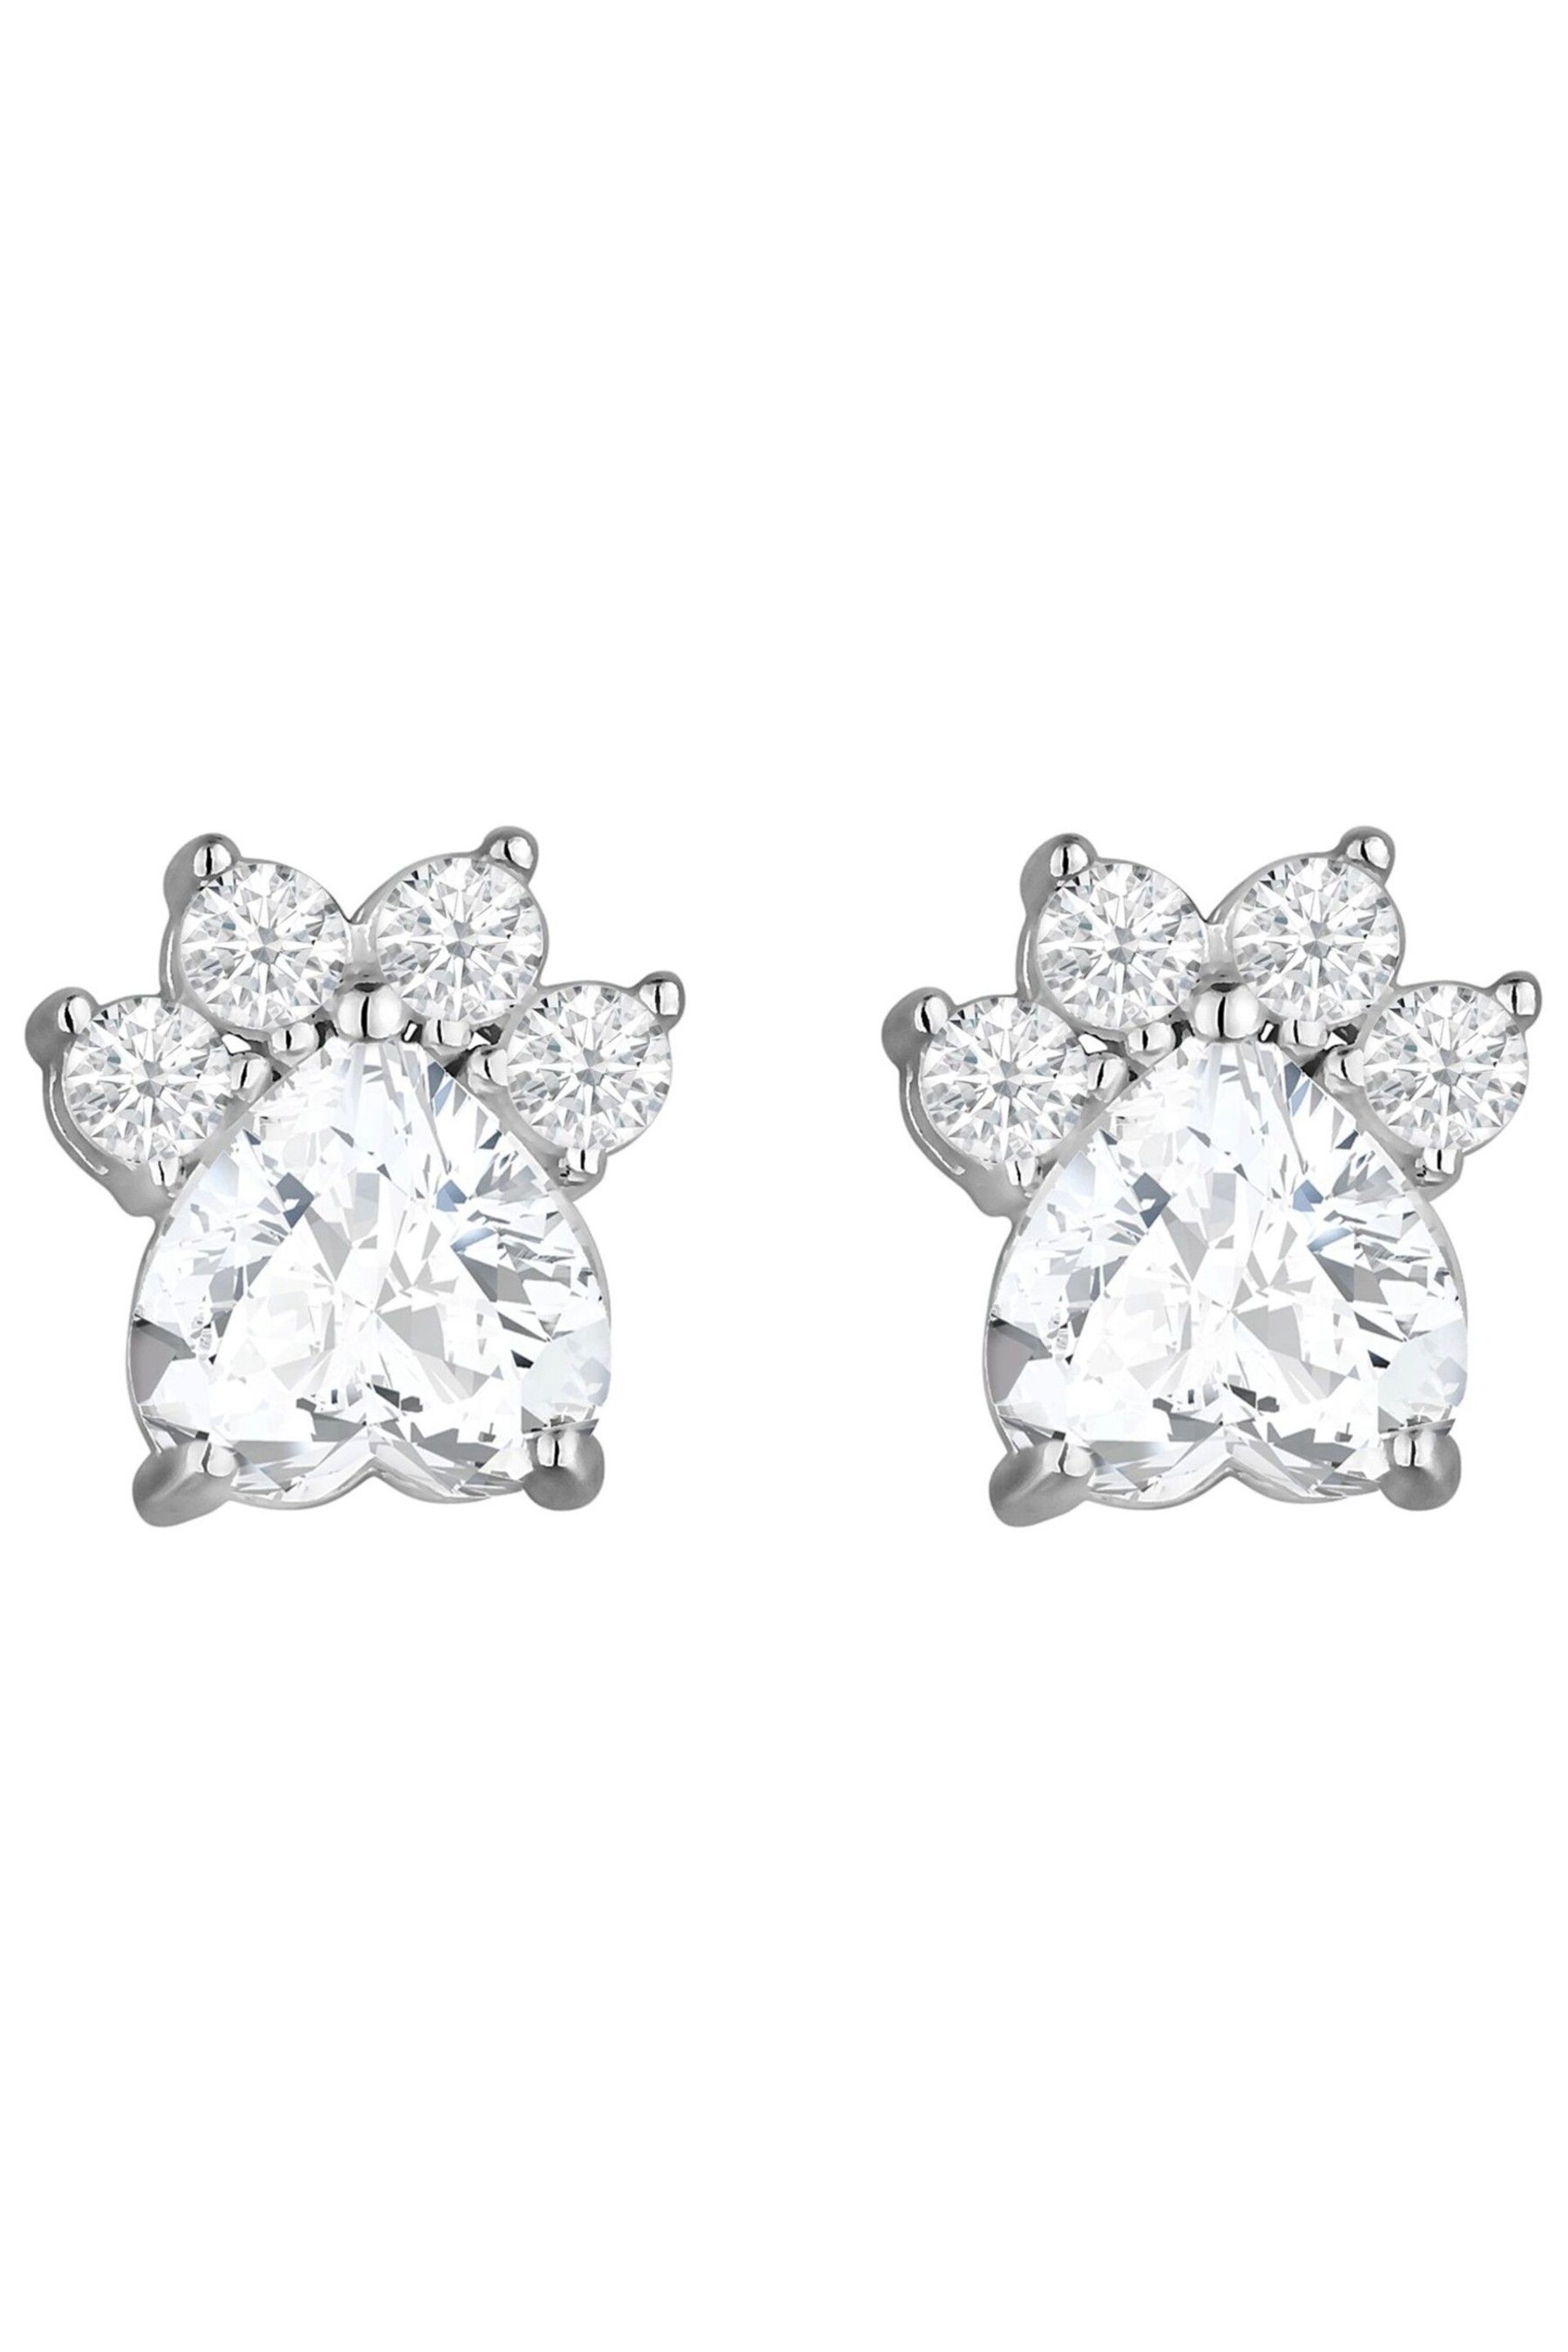 Simply Silver Sterling Silver 925 Paw Print Cubic Zirconia Earrings - Image 2 of 3